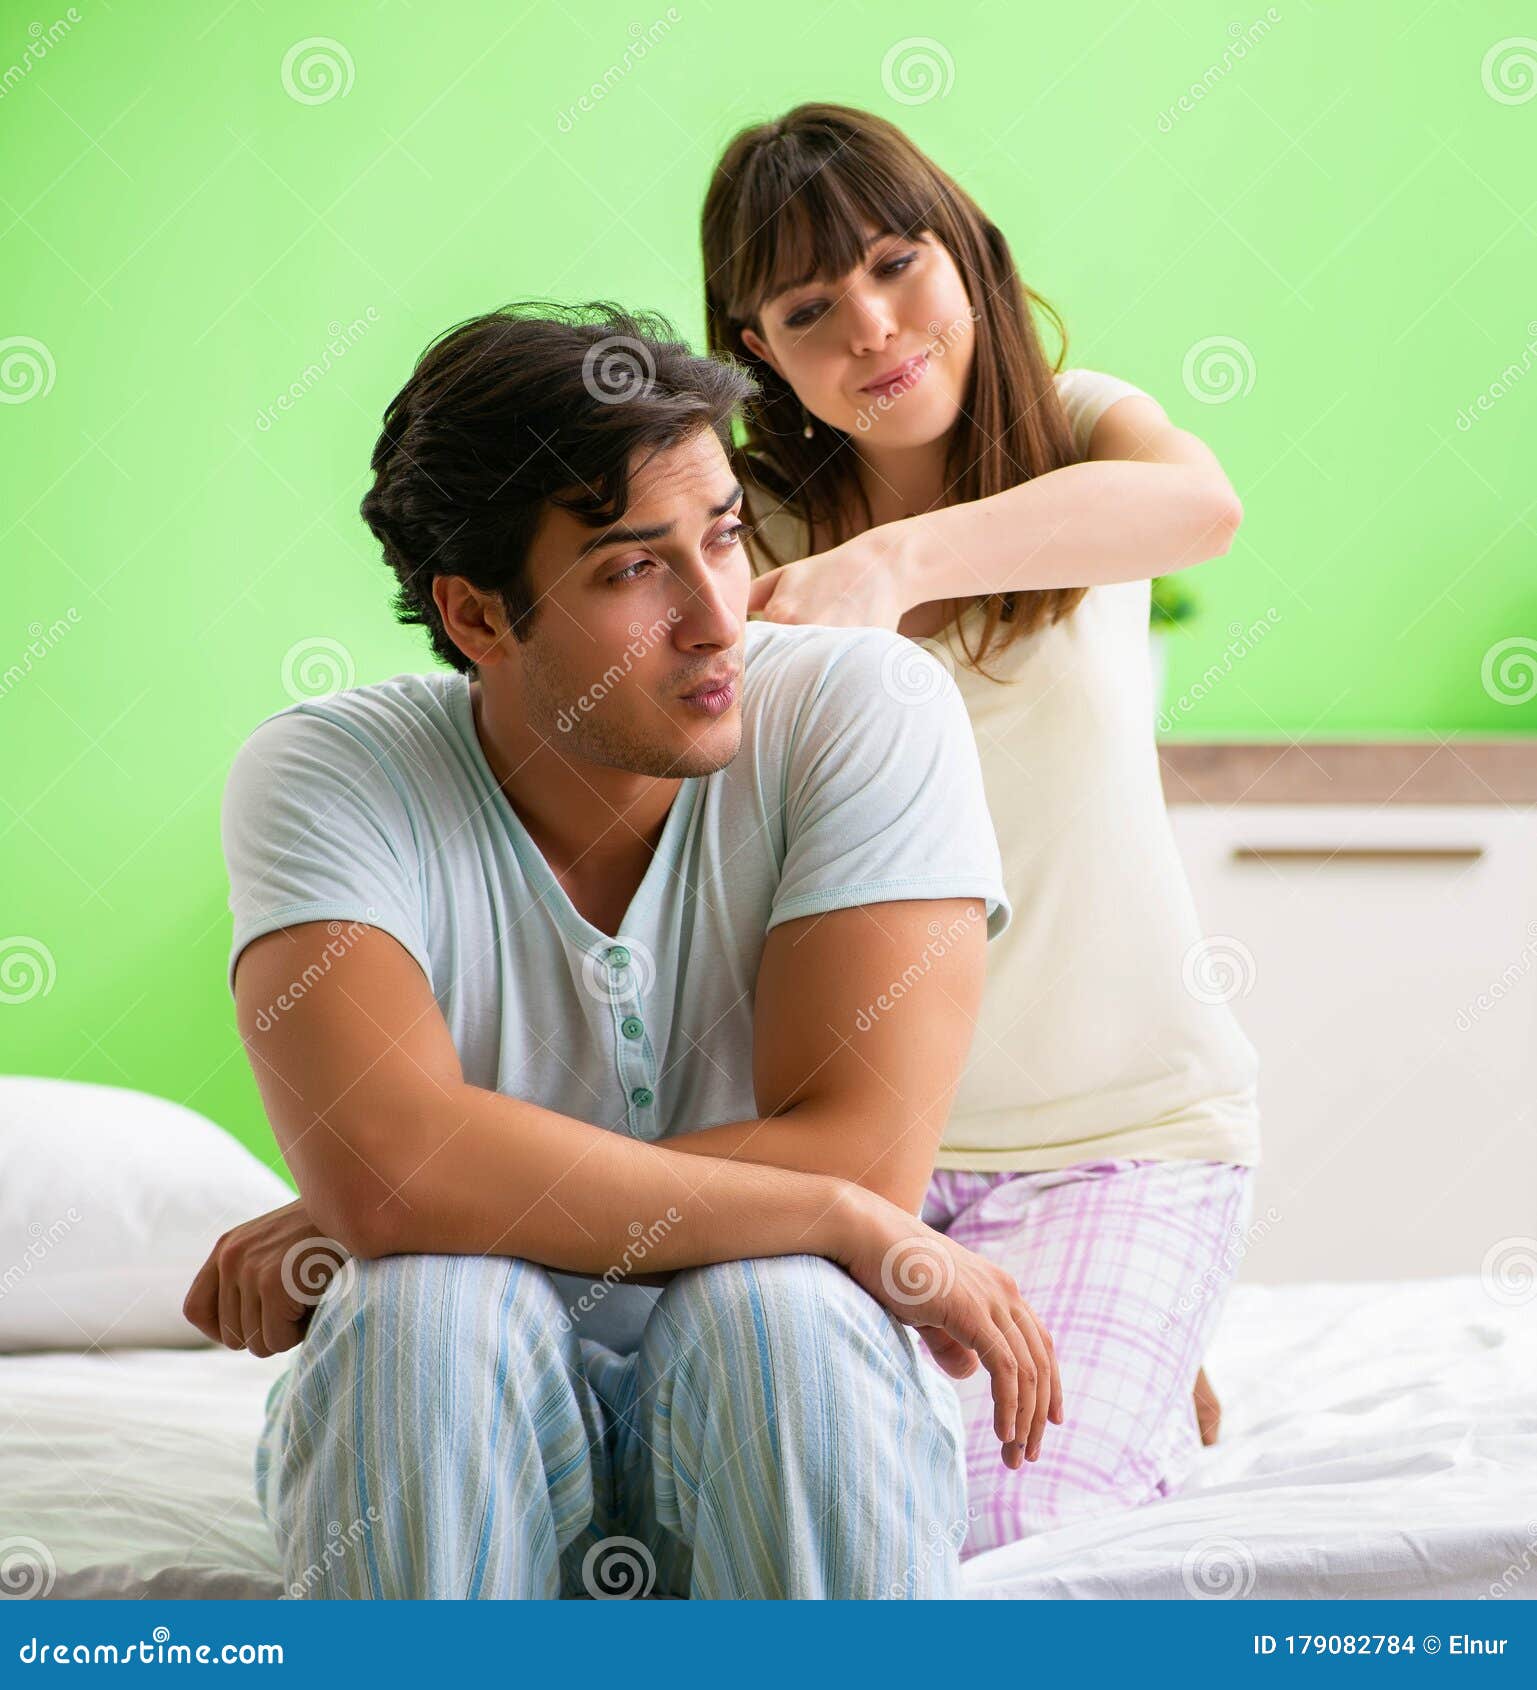 Woman Doing Massage To Her Husband in Bedroom Stock Photo